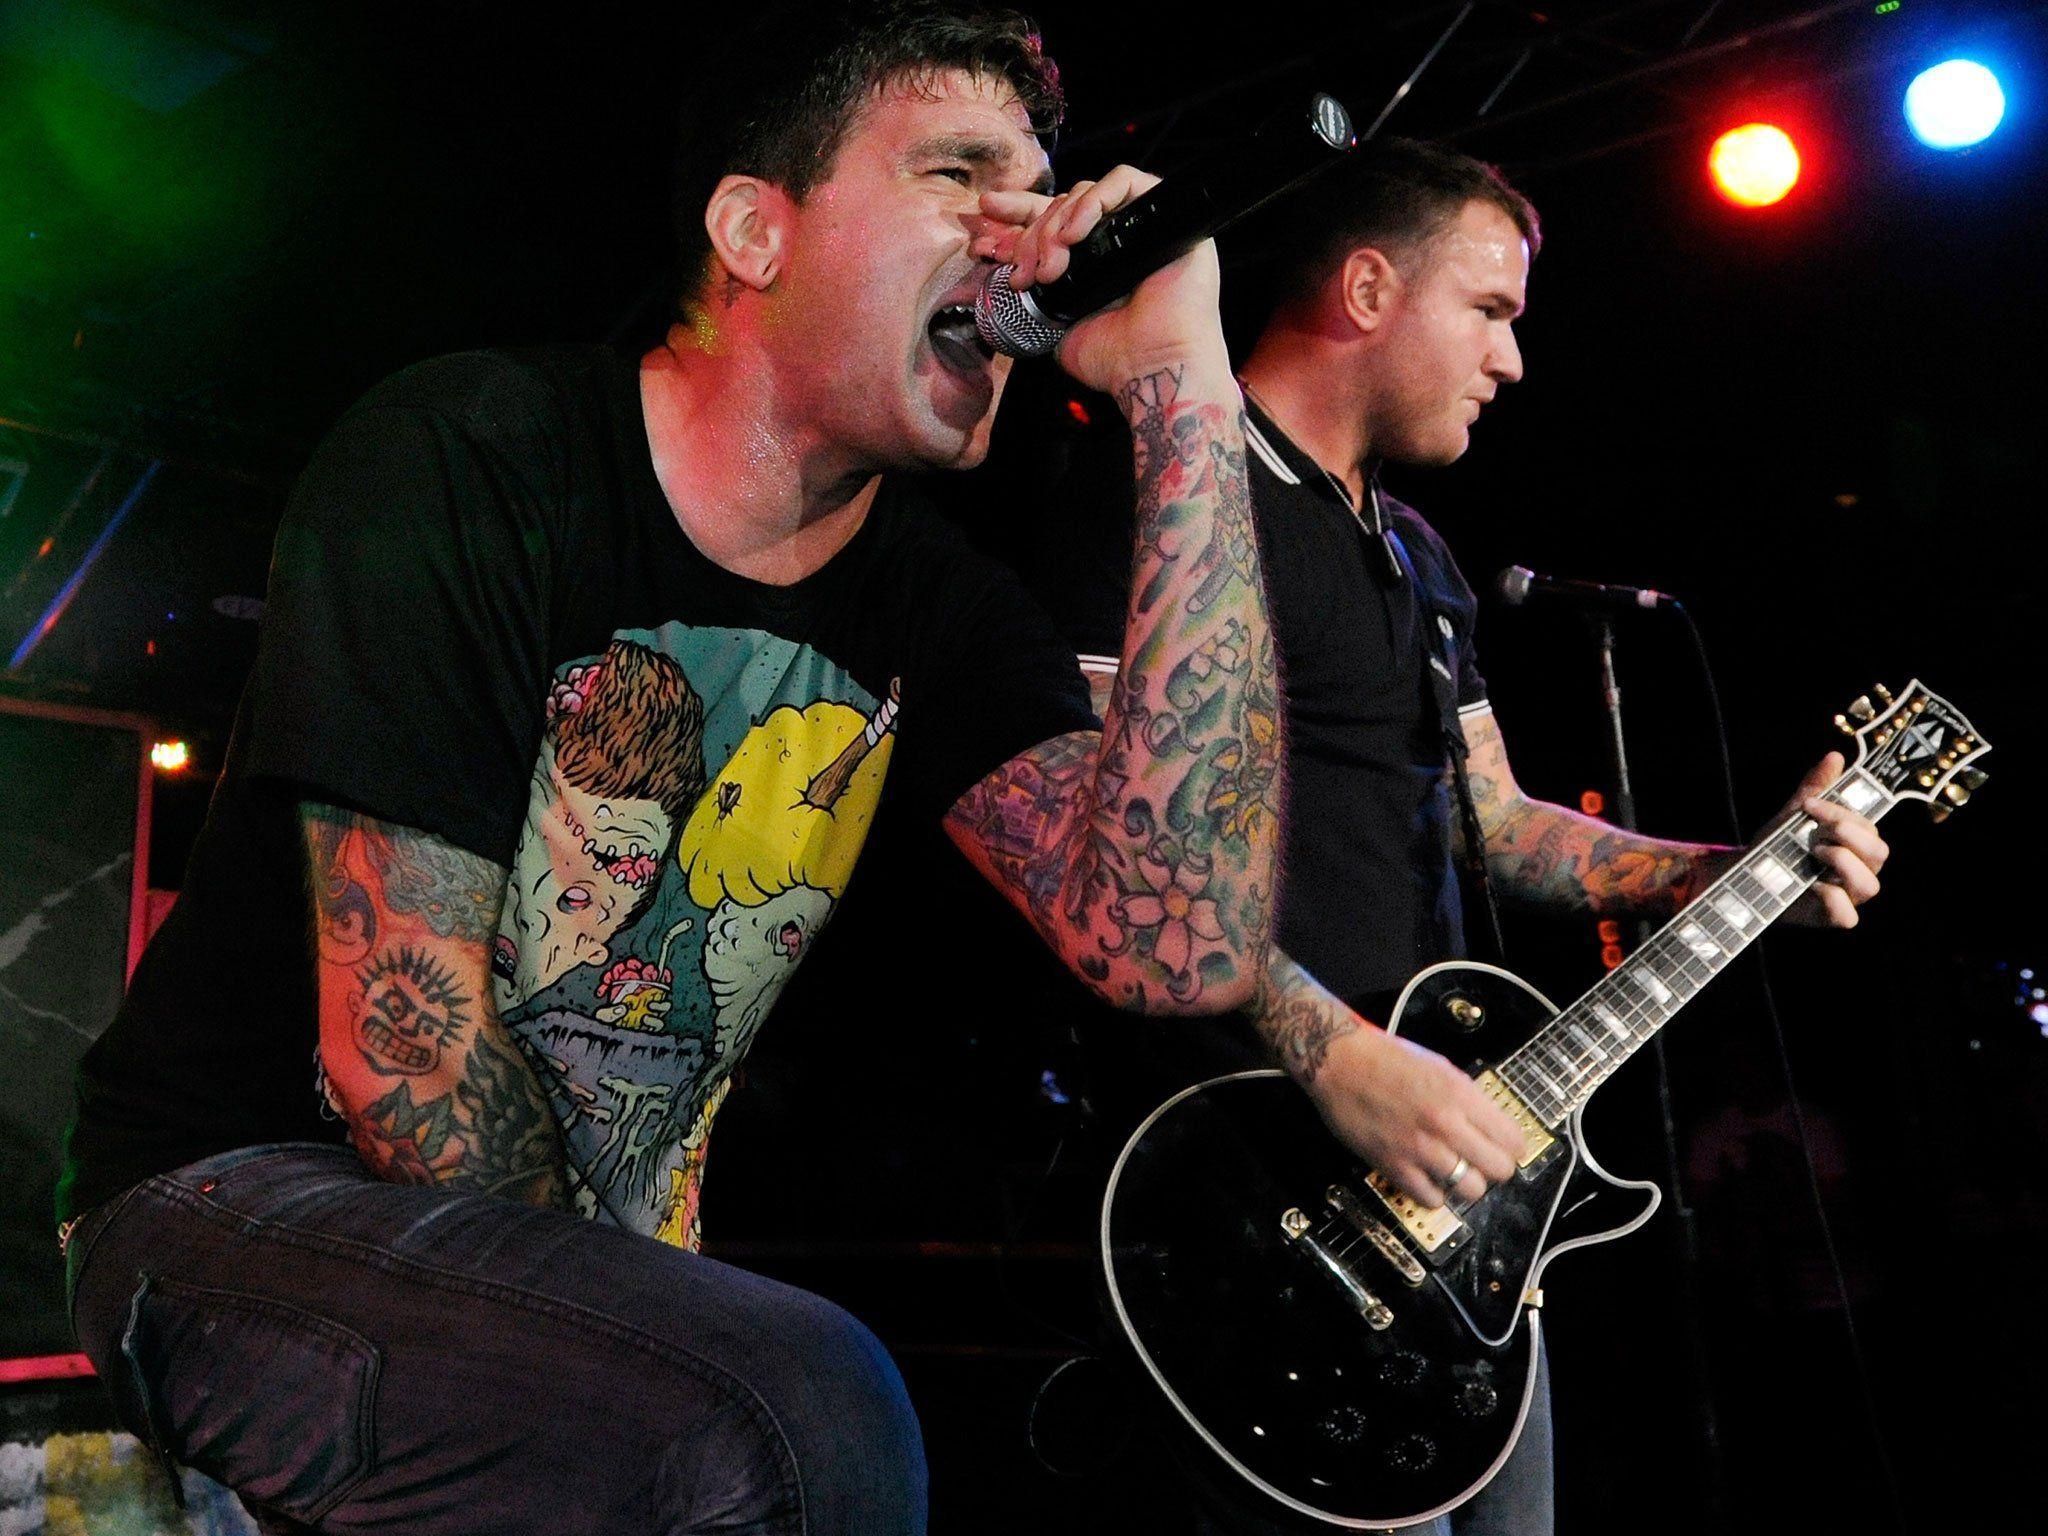 New Found Glory save horse named after band hours before it was due